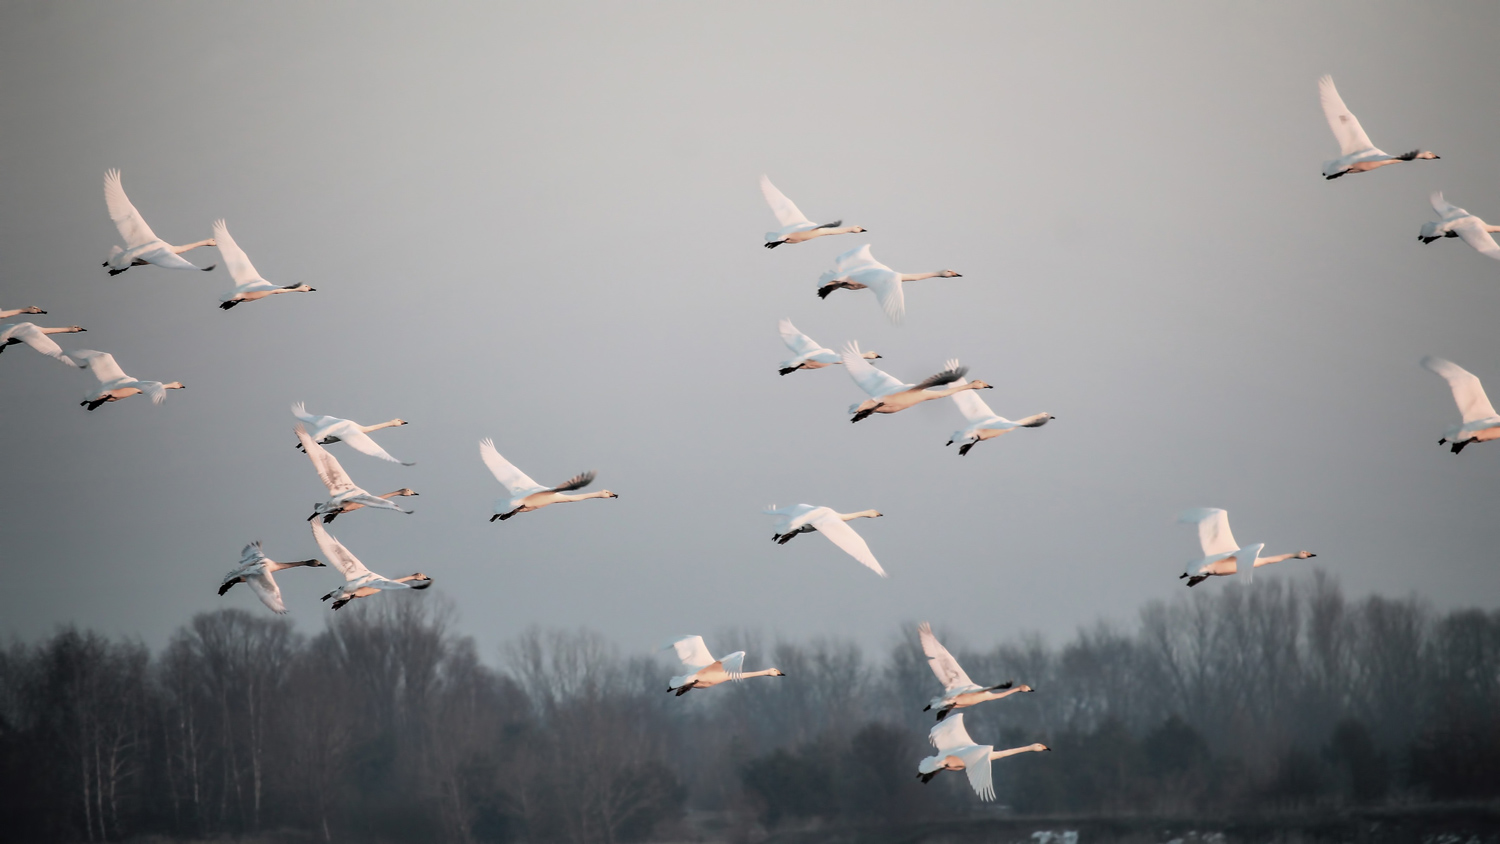 A flock of white geese in flight